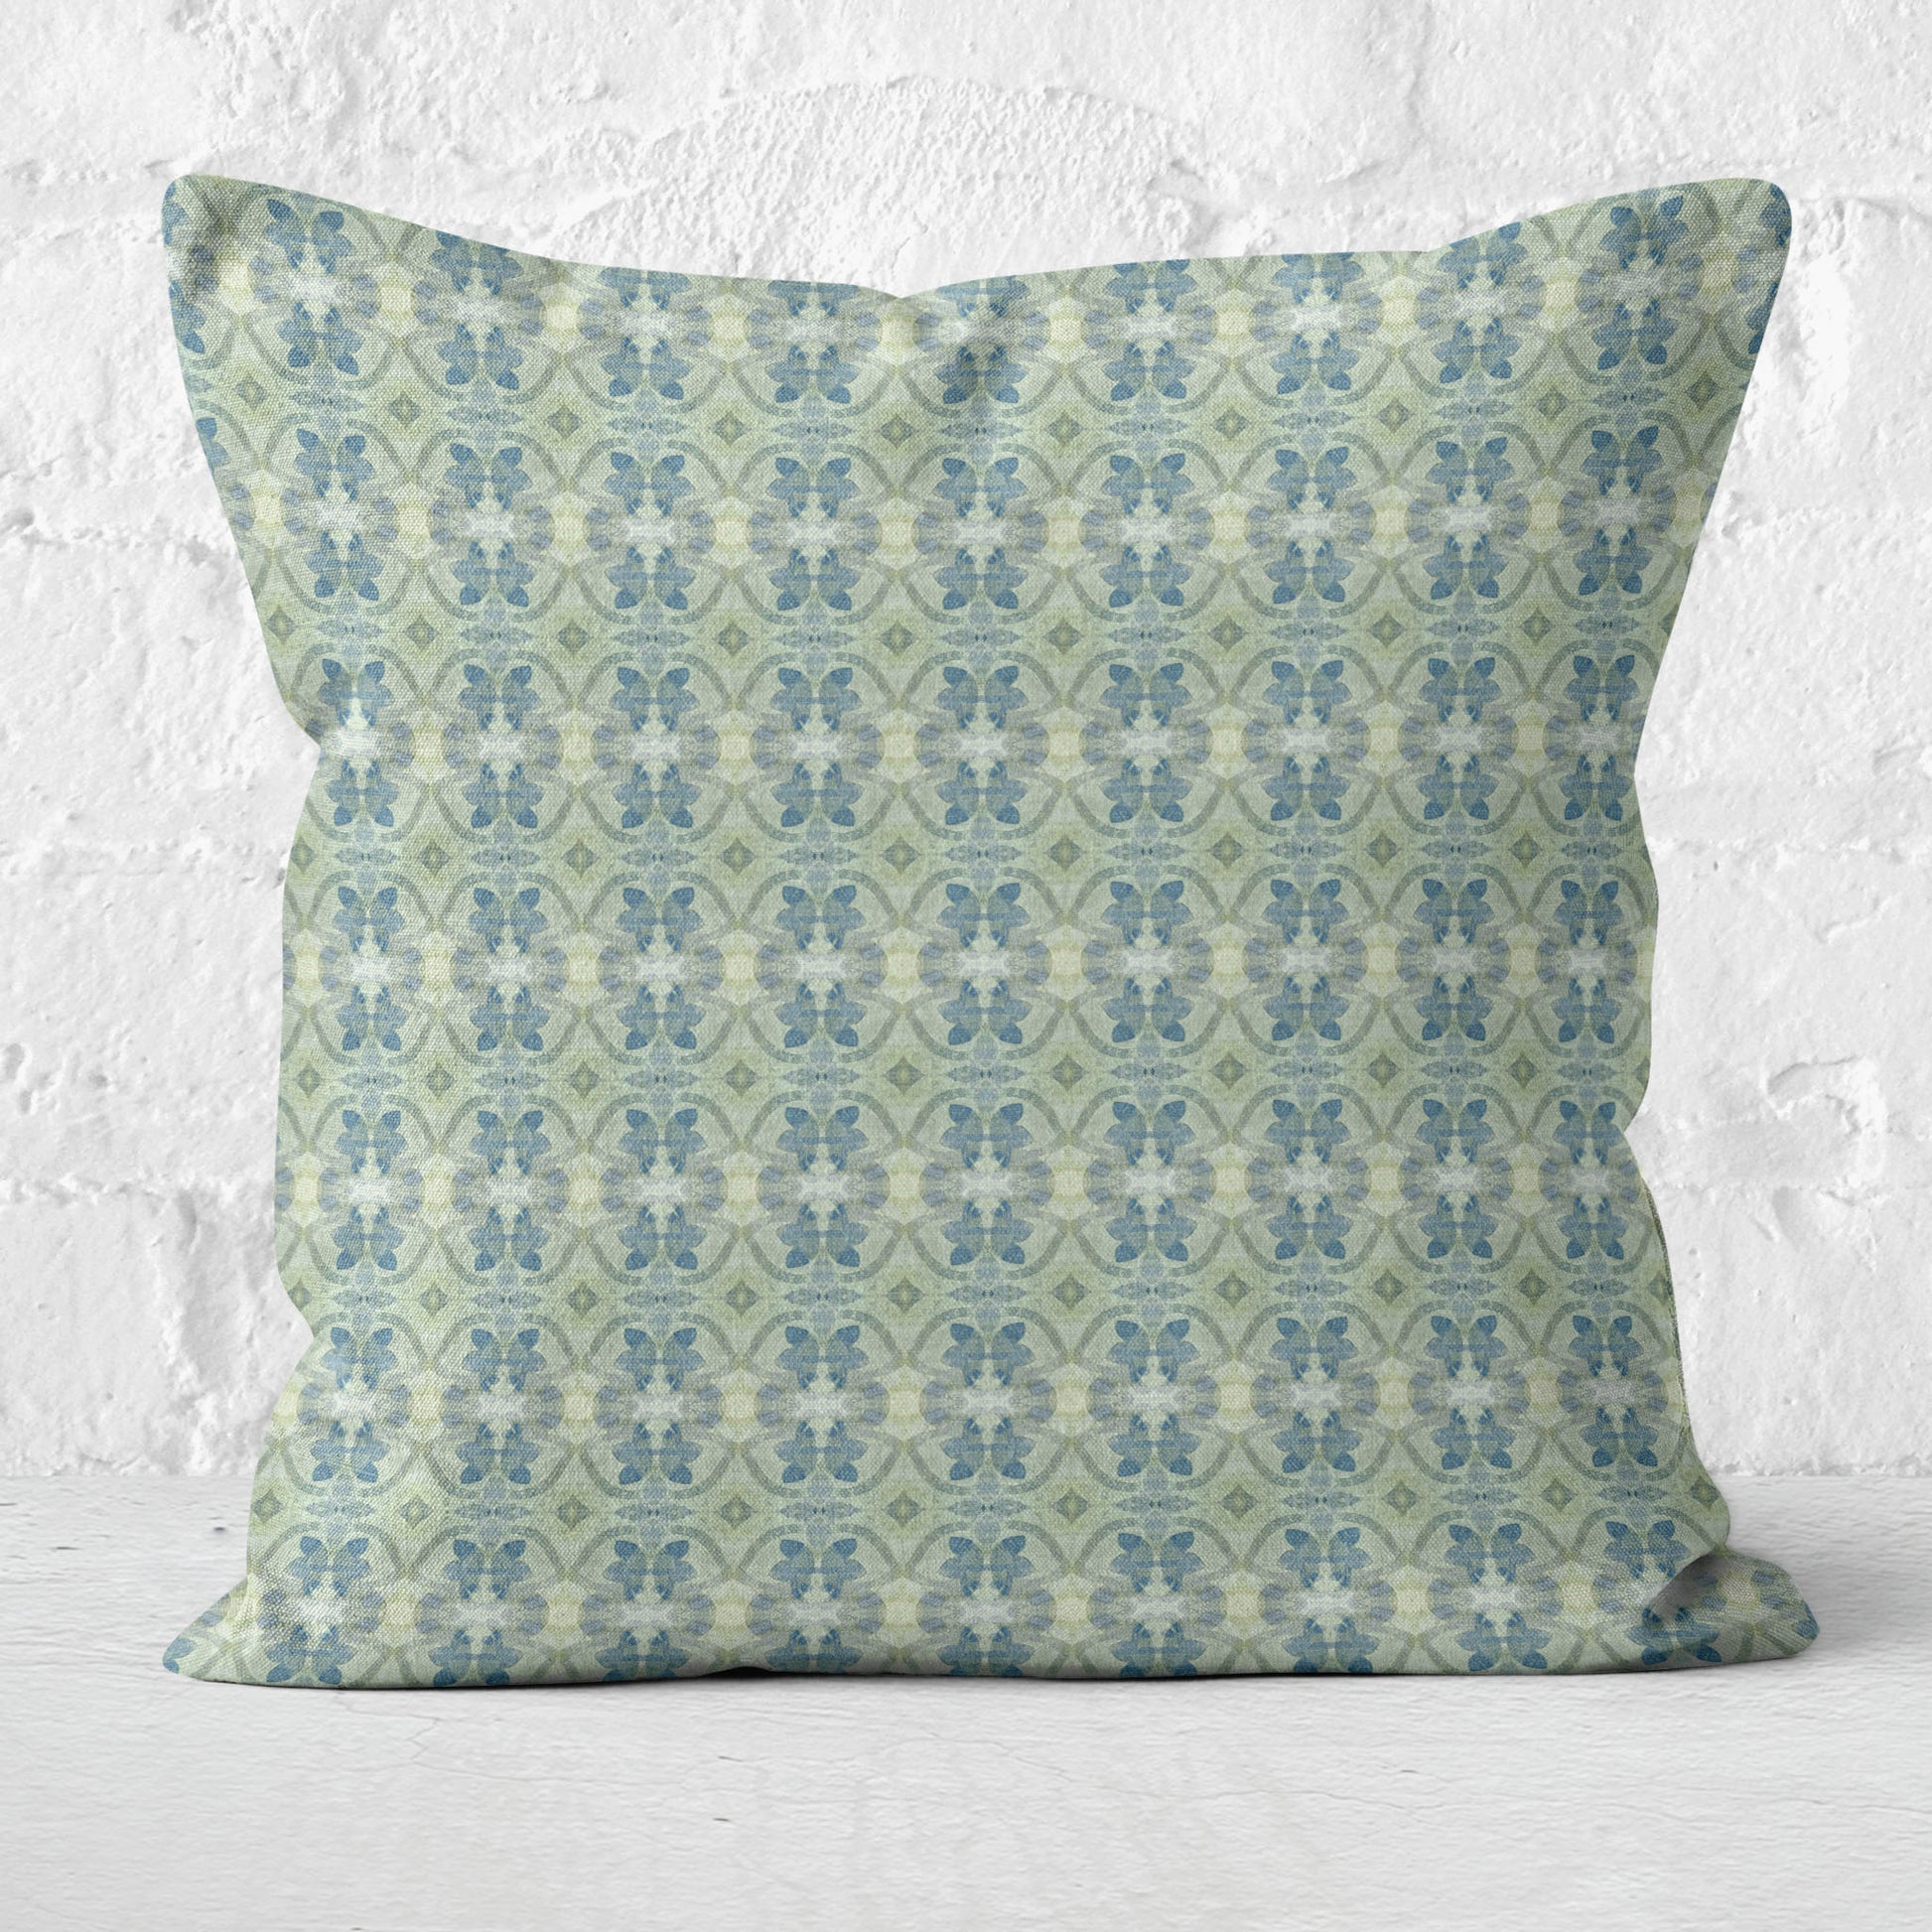 Square throw pillow featuring a blue and green abstract floral pattern set against a white brick wall